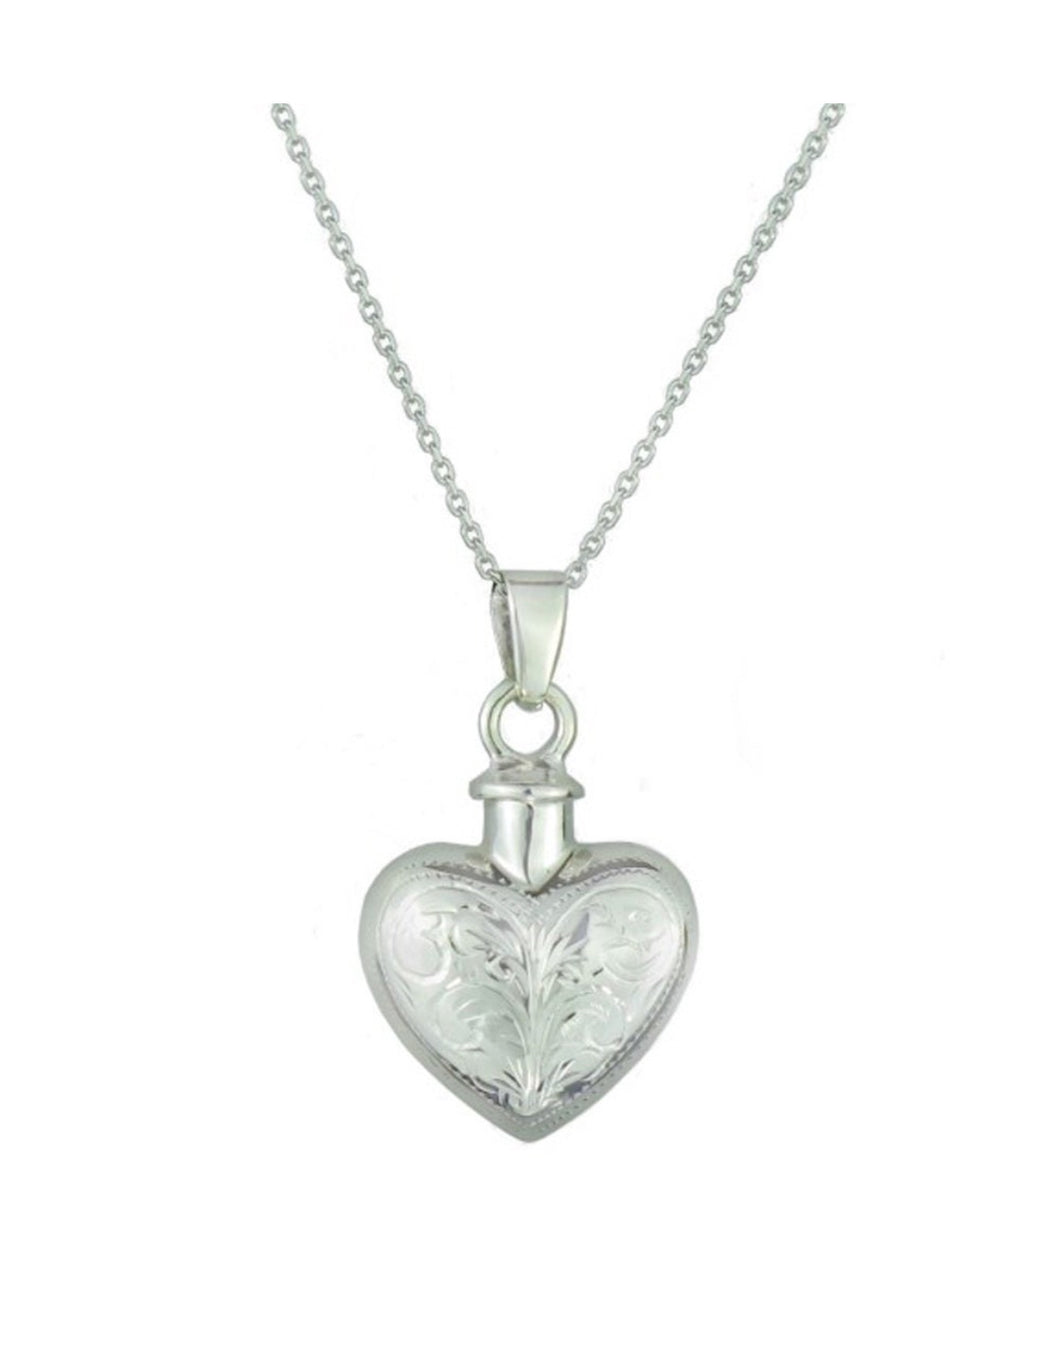 Sterling Silver Vintage Heart Cremation Memorial Ashes Pendant with Optional Personalisation